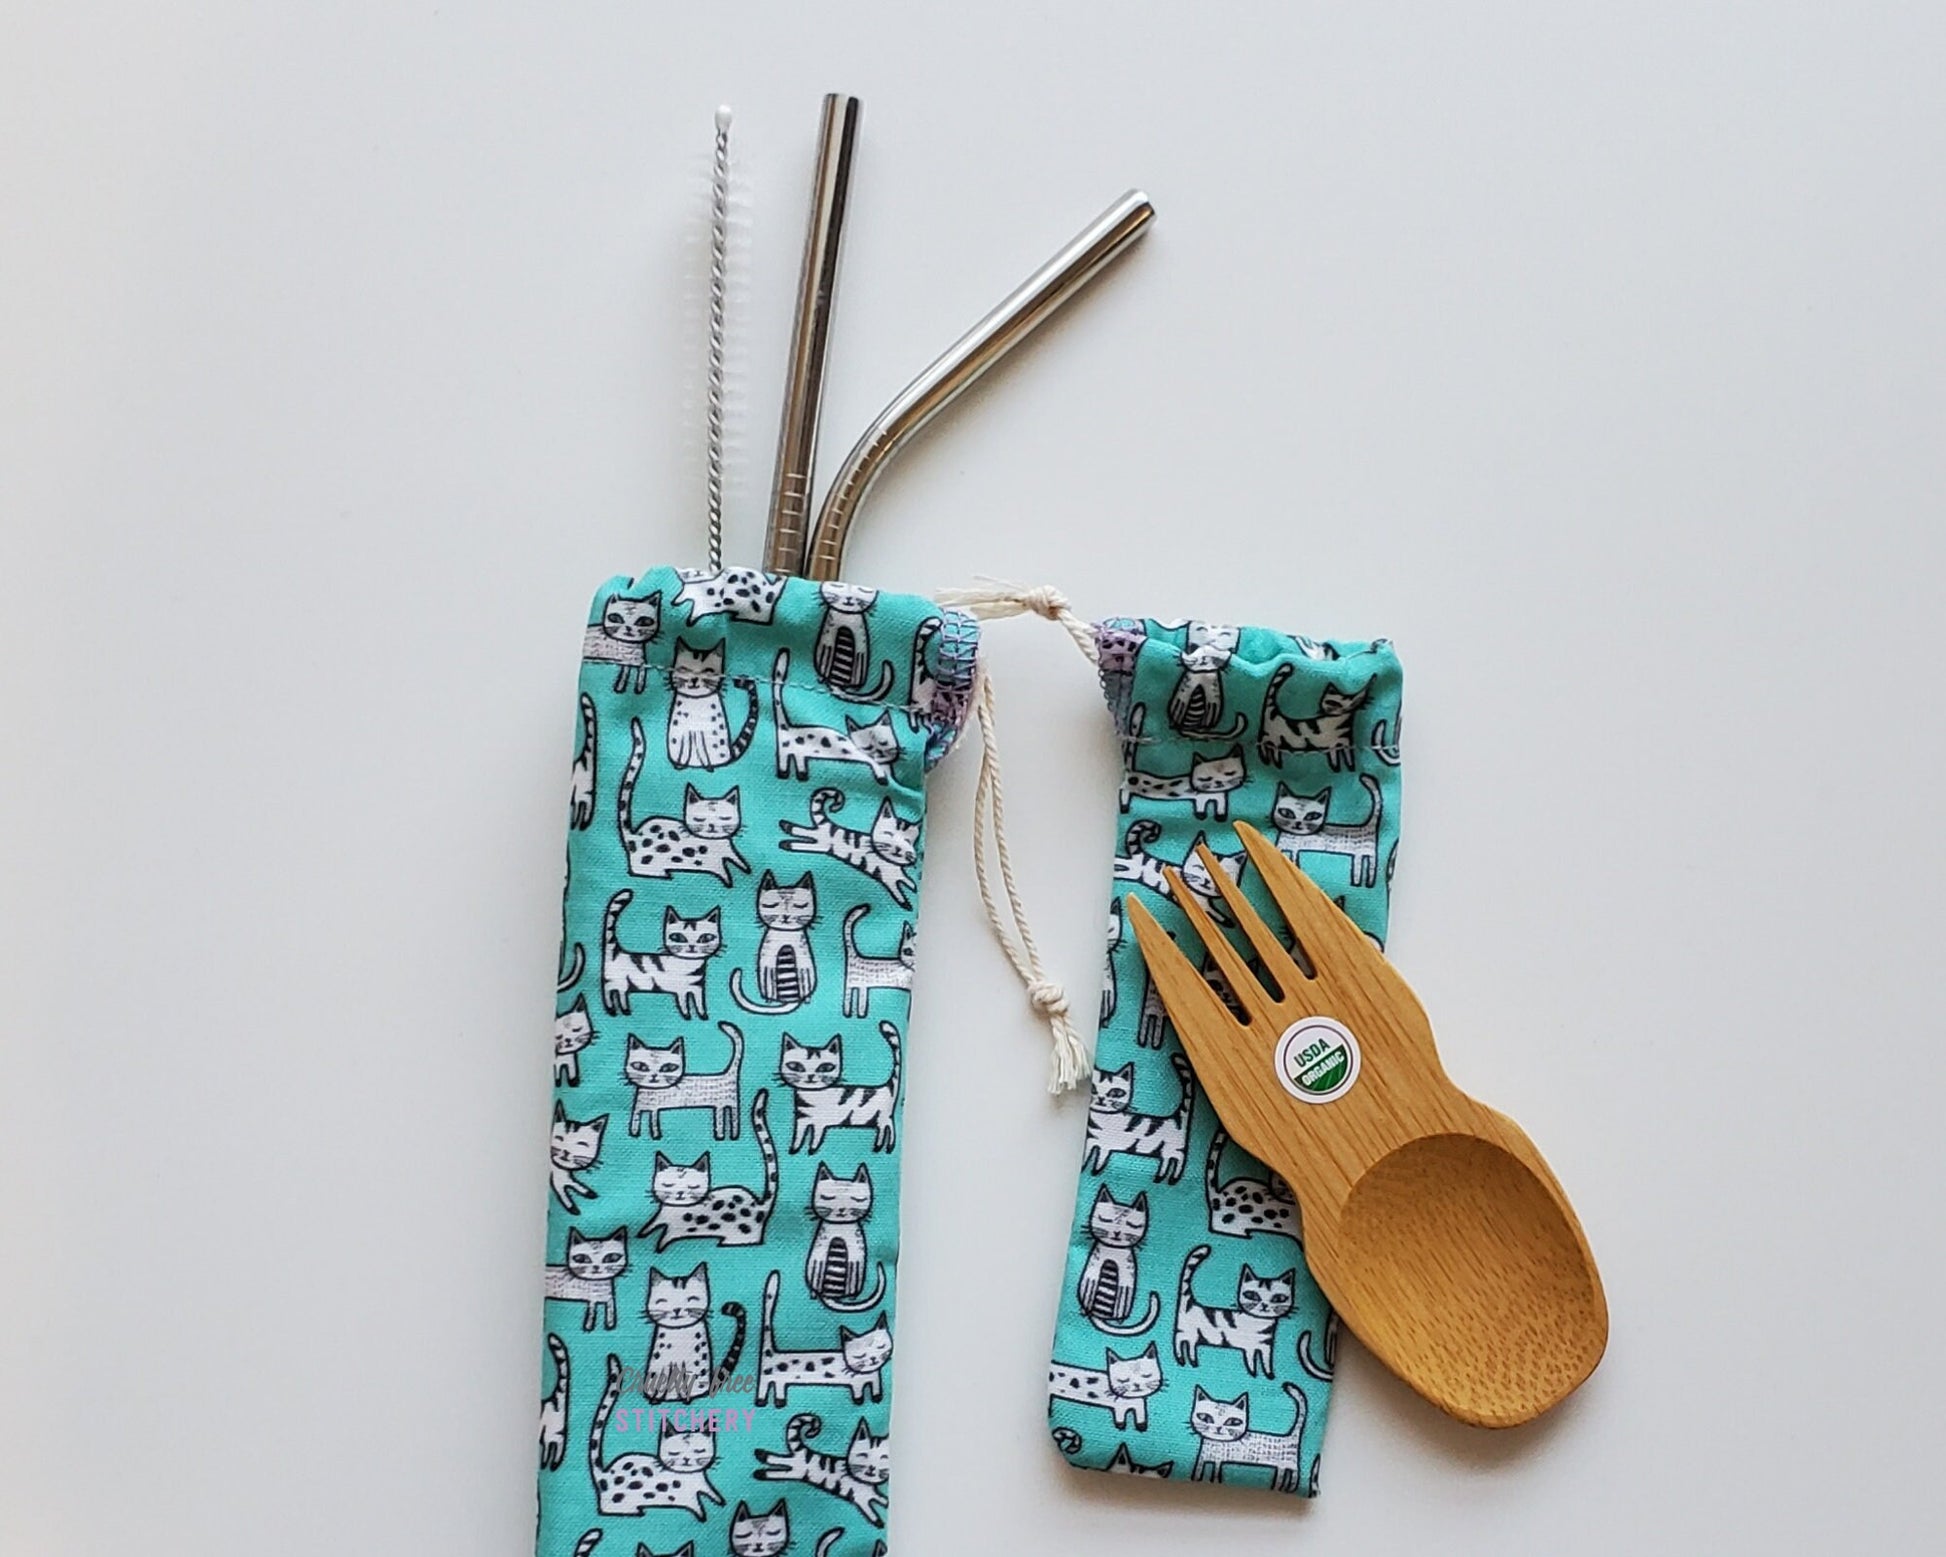 Reusable bamboo spork and stainless steel straw pouch set. The pouches are both light blue with tiny black and white cartoon cats in various styles and positions like sitting up, laying down, jumping, etc.